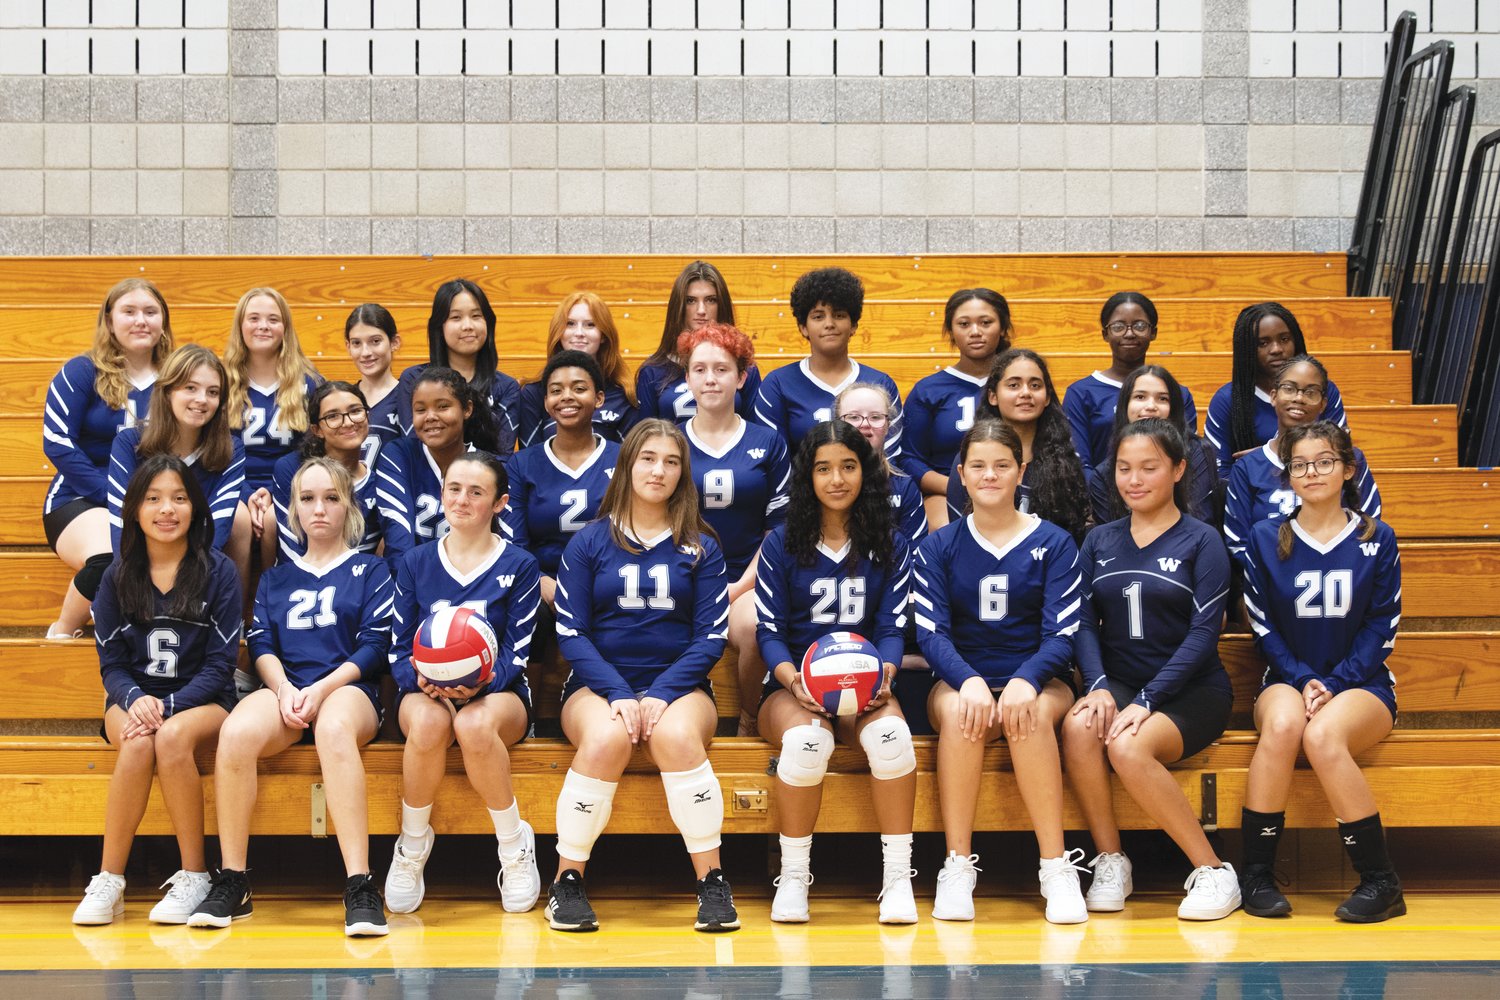 The JV volleyball team went 4-8 and gained valuable experience on the court this season.